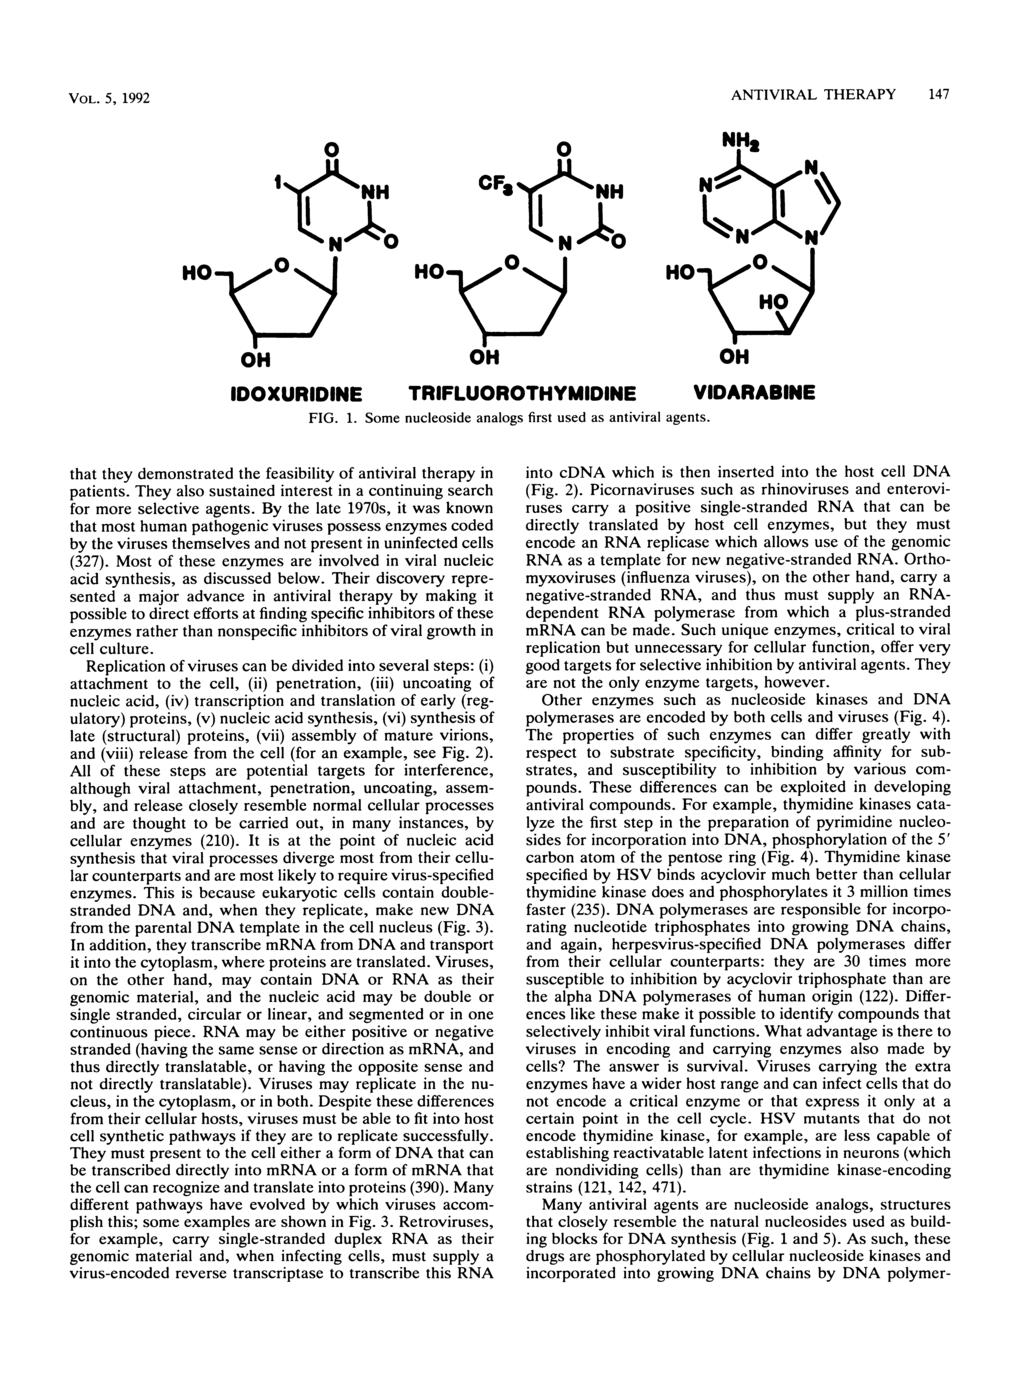 VOL. 5, 1992 ANTIVIRAL THERAPY 147 OH IDOXURIDINE TRIFLUOROTHYMIDINE VIl FIG. 1. Some nucleoside analogs first used as antiviral agents.